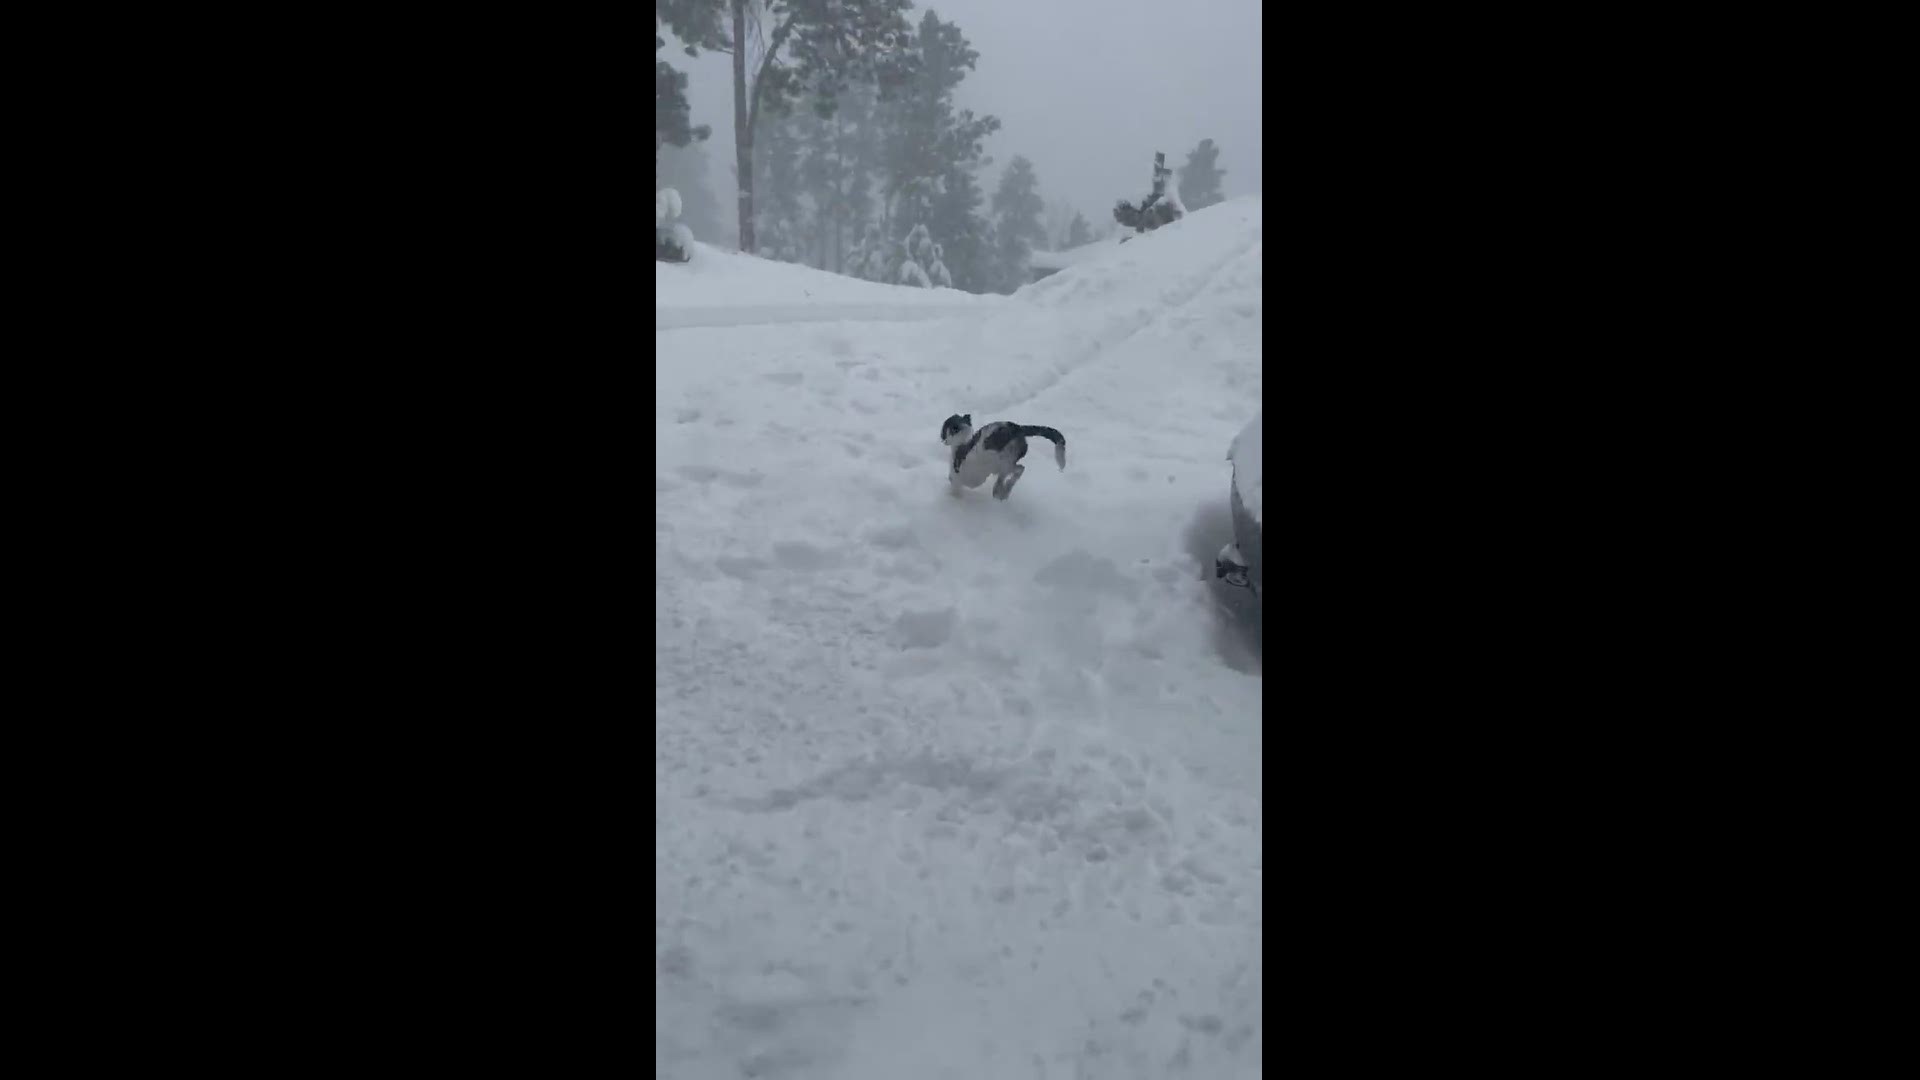 Rosie the whippet loves the snow!
Credit: Alima Blackwell